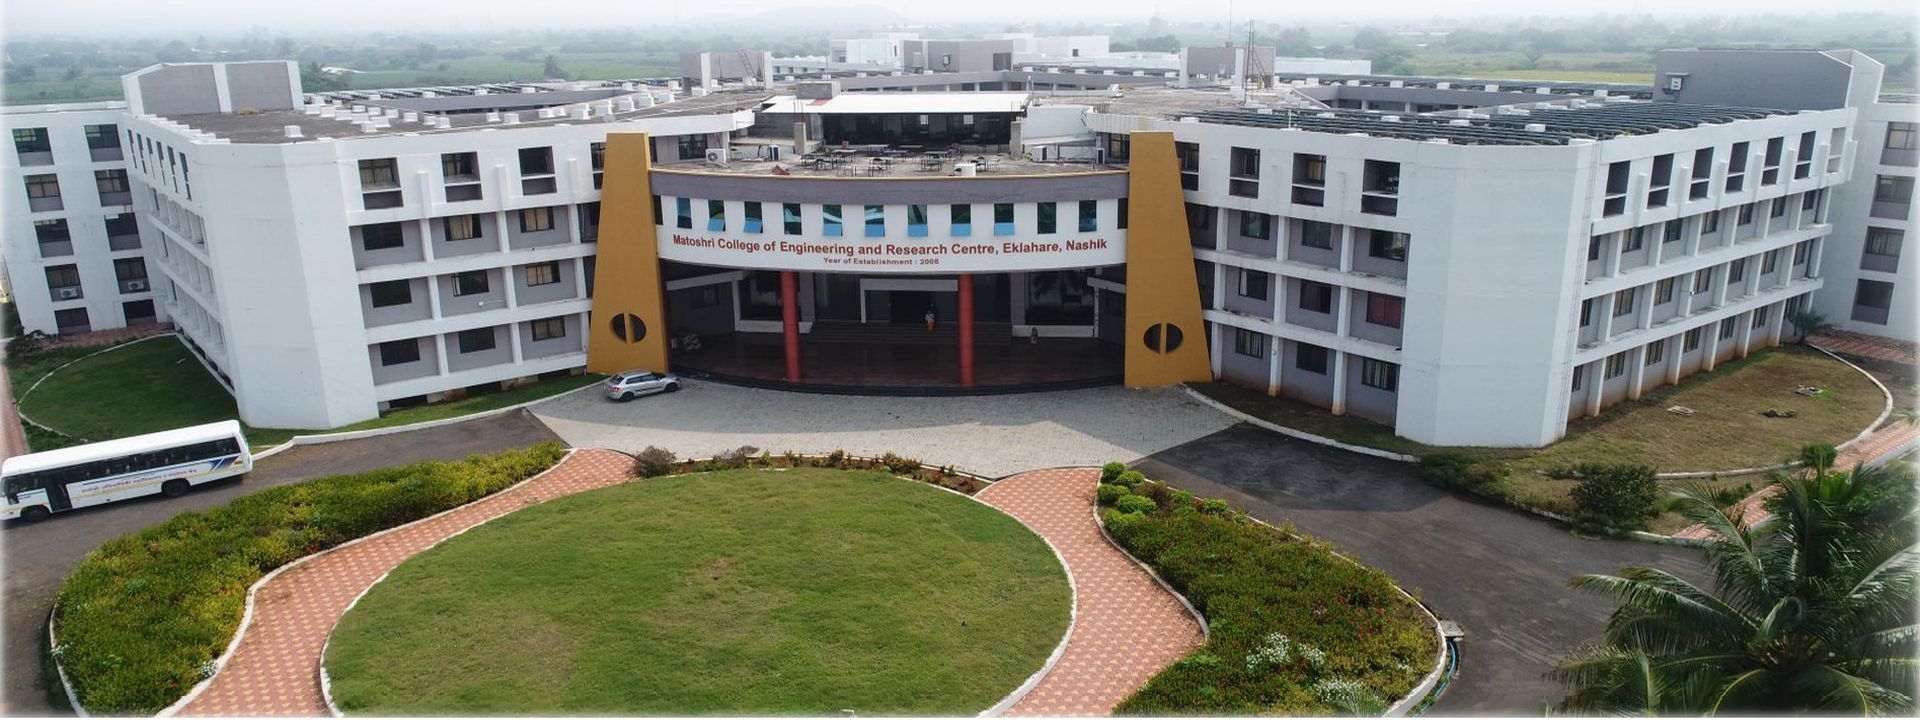 Matoshri College of Engineering and Research Centre